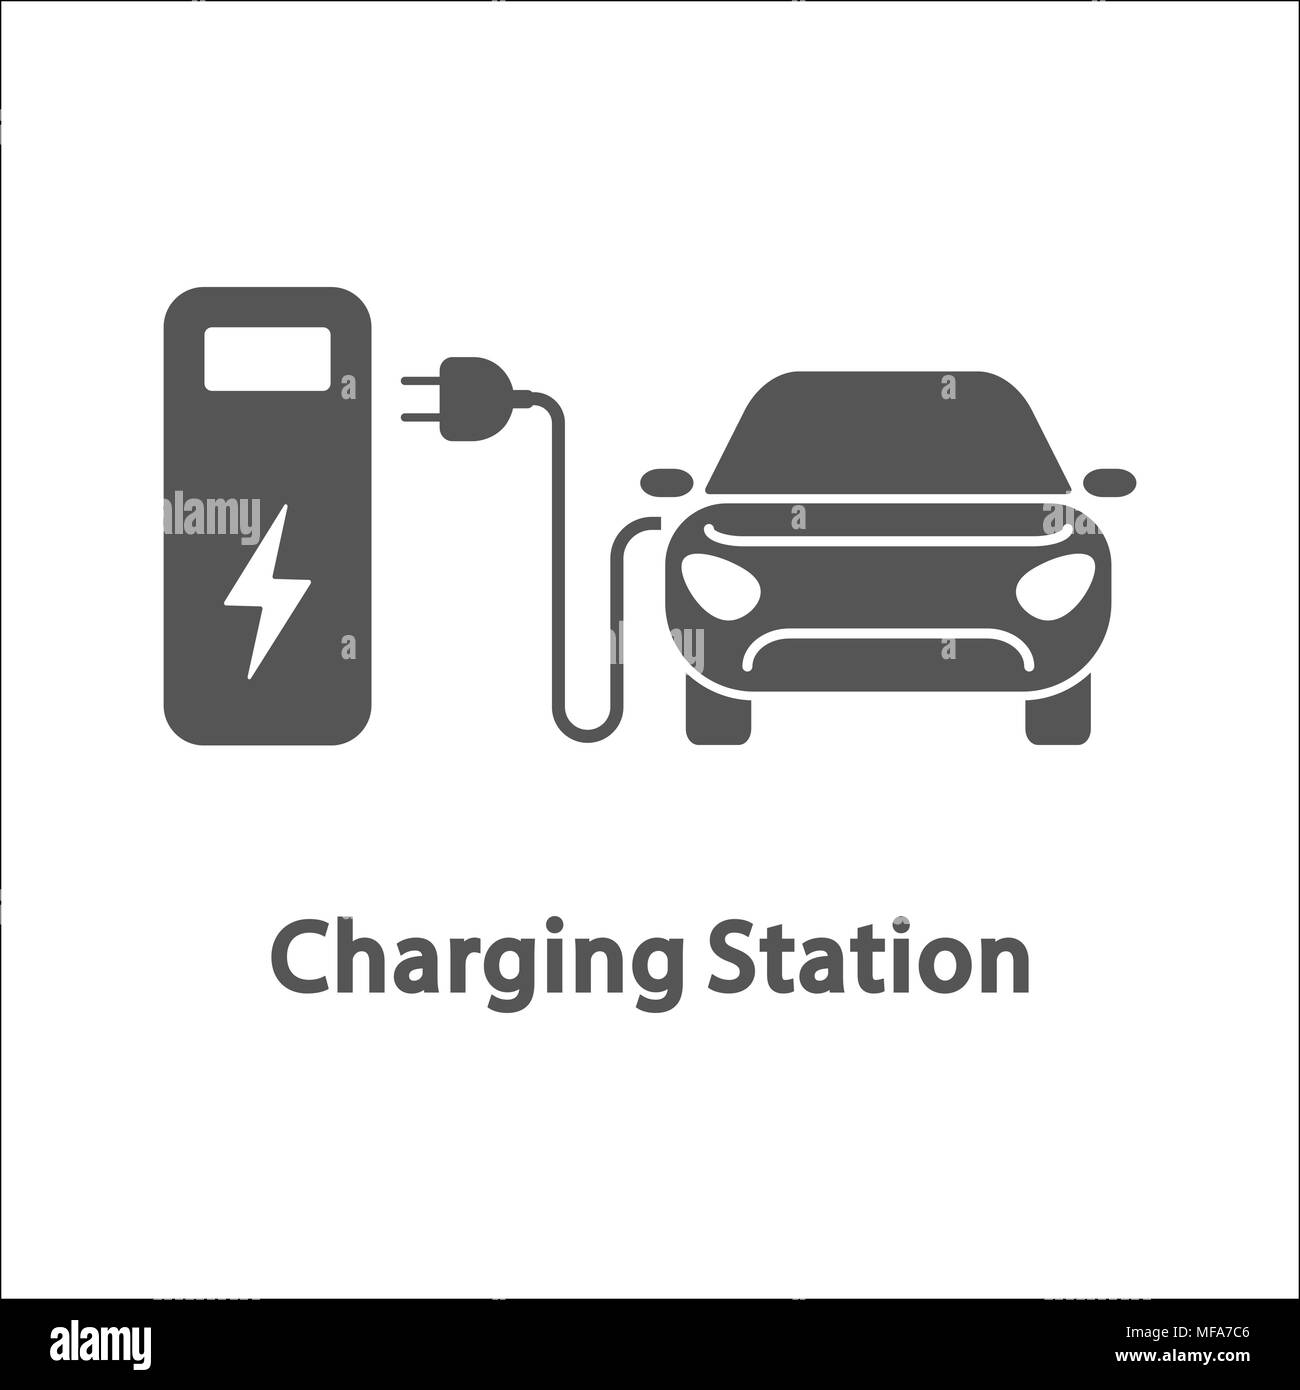 Electric car and charging station. Electric vehicle charging station, electric recharging point, simple icon, vector illustration. Stock Vector